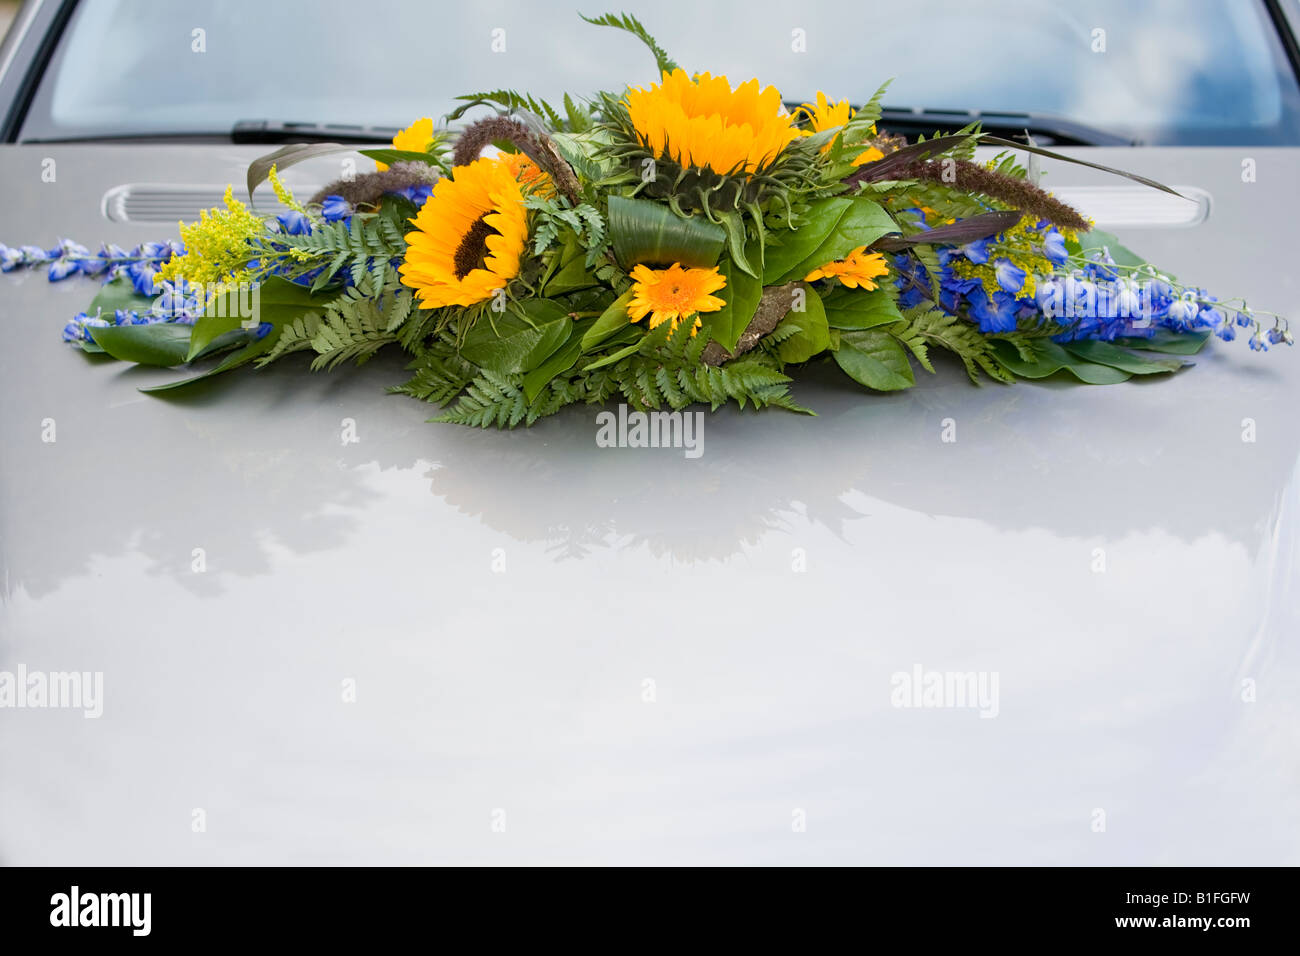 Convivial decorated bonnet at a marriage Stock Photo